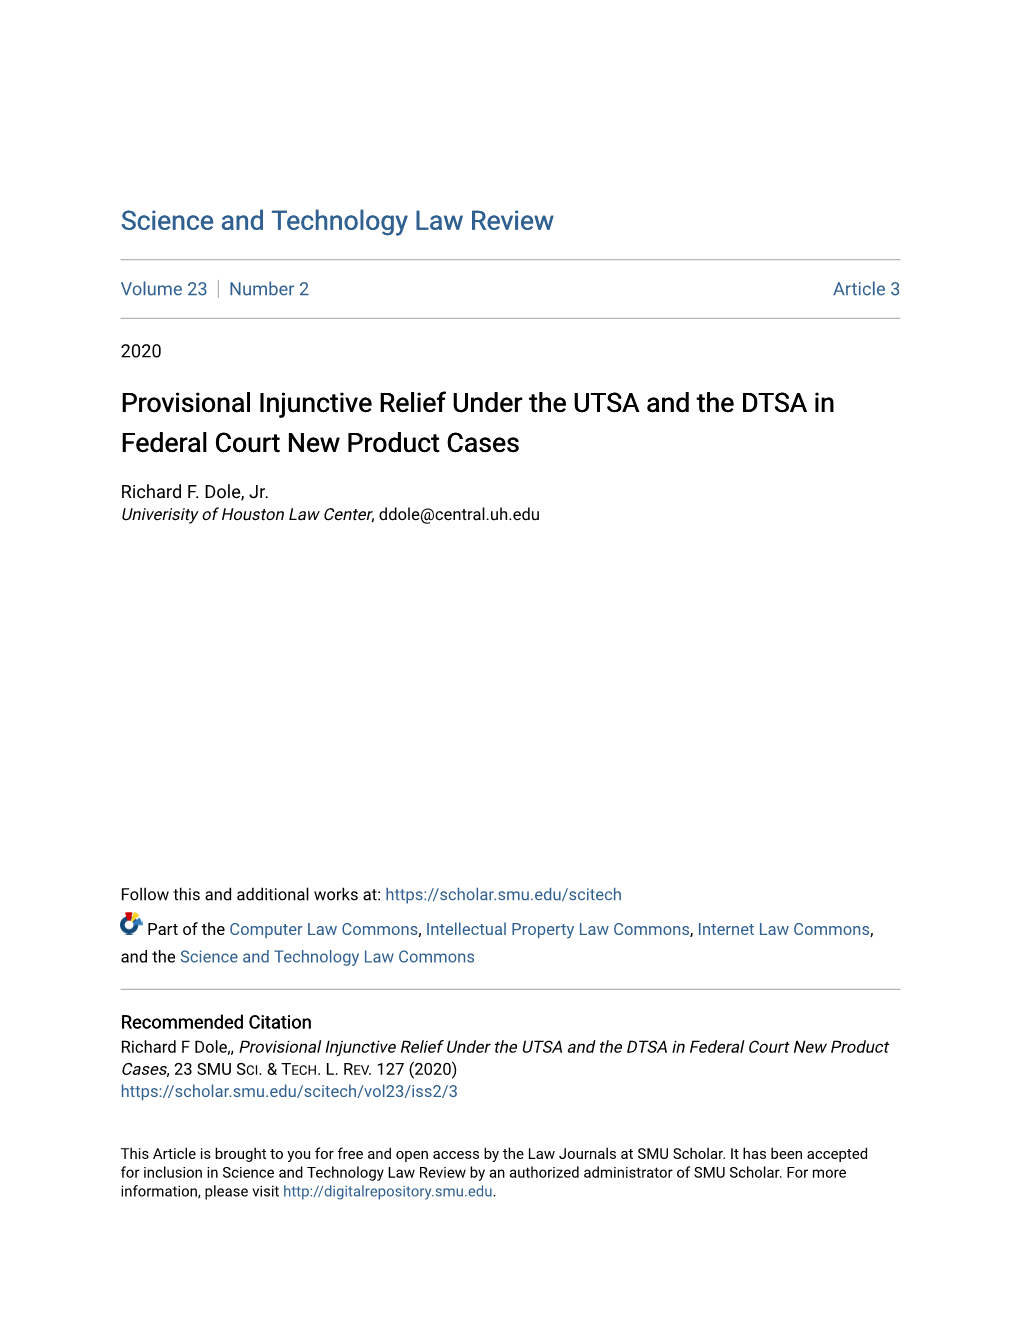 Provisional Injunctive Relief Under the UTSA and the DTSA in Federal Court New Product Cases